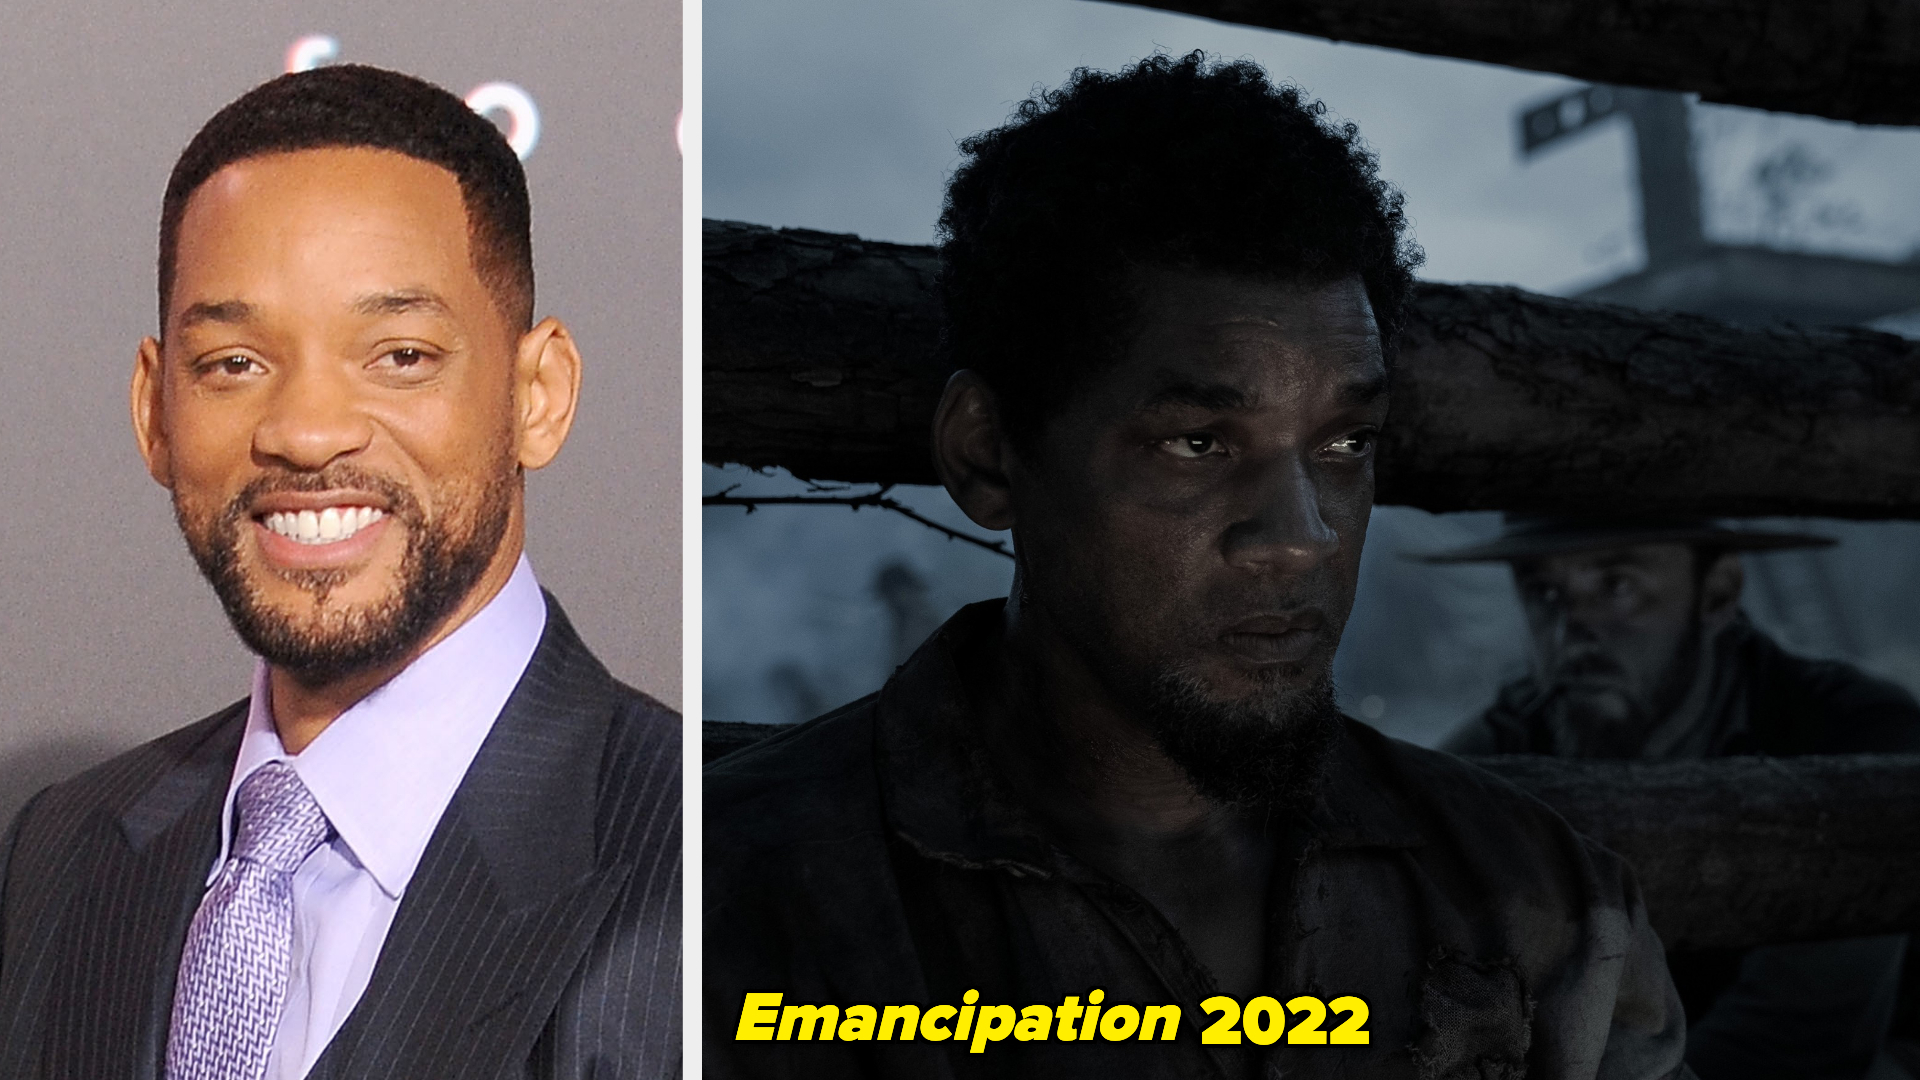 Will Smith on the left smiling in a suit, and in a movie still from &quot;Emancipation 2022&quot; on the right